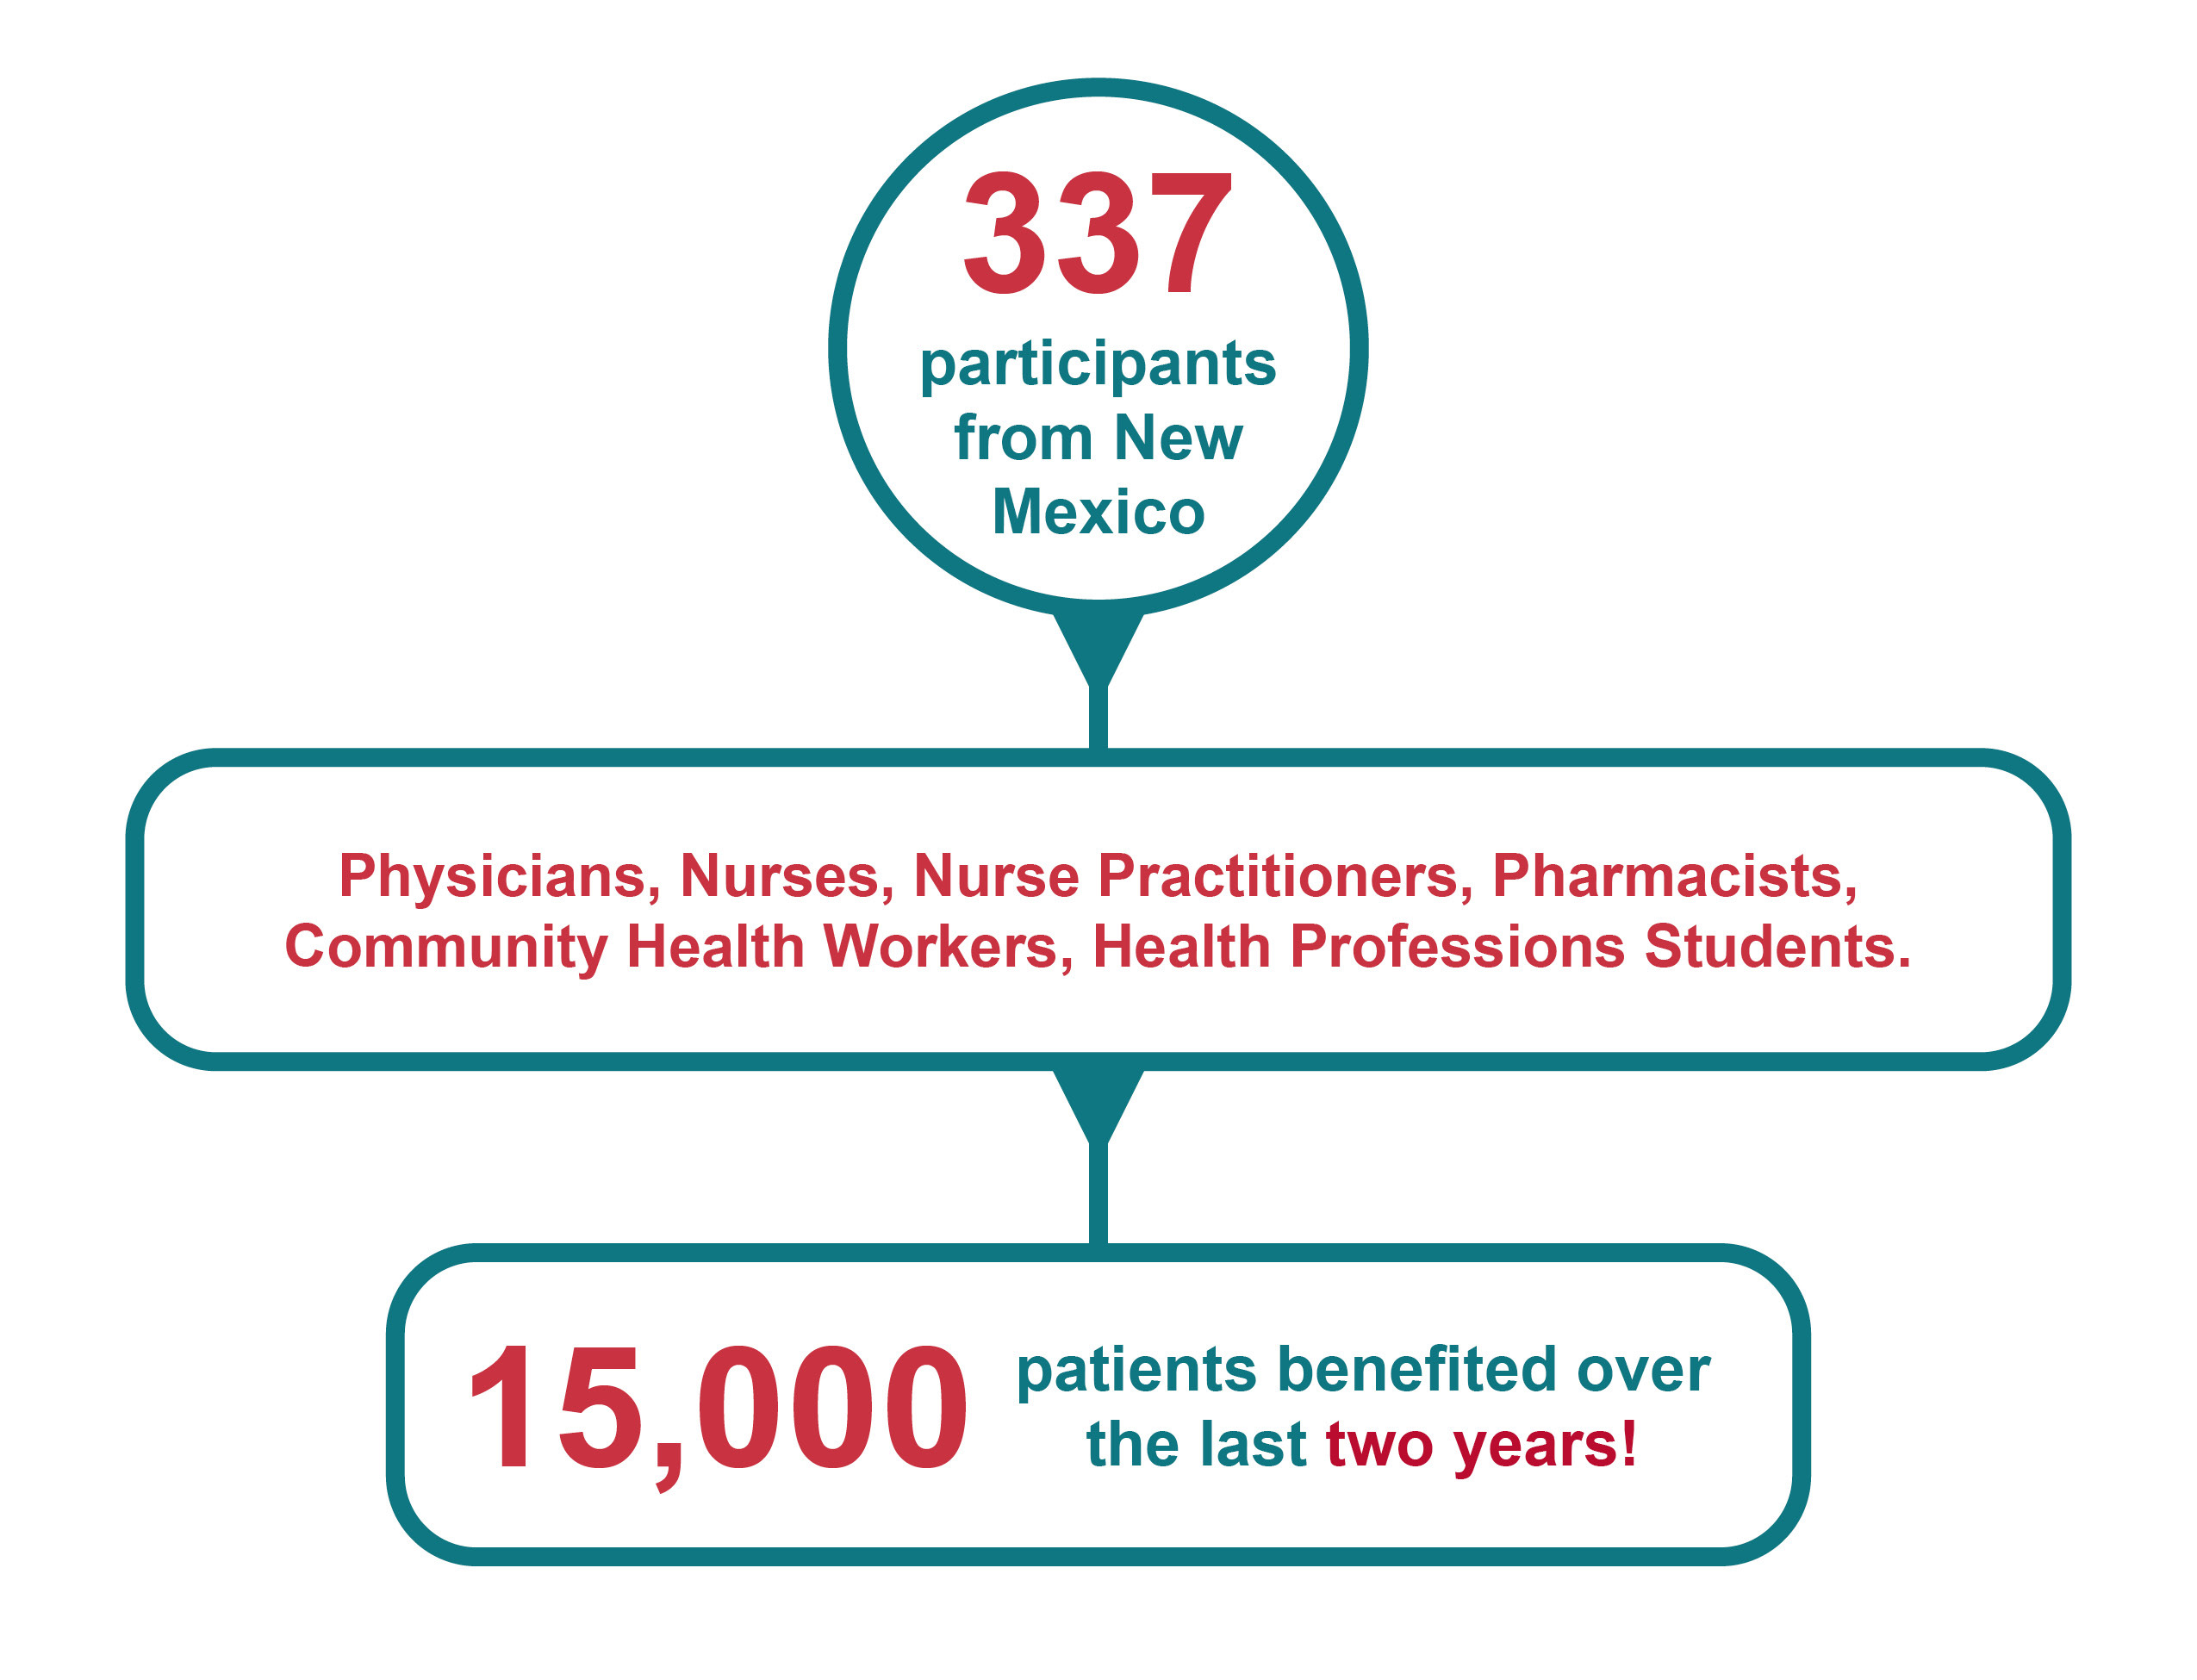 ECHO Infographic: 337 participants are from New Mexico; participants joined an average of 5.3 sessions each in FY20 and FY21; participants included physicians, nurses, nurse practitioners, pharmacists; community health workers and health profession students; we have helped 15,000 patients over the last 2 years. 